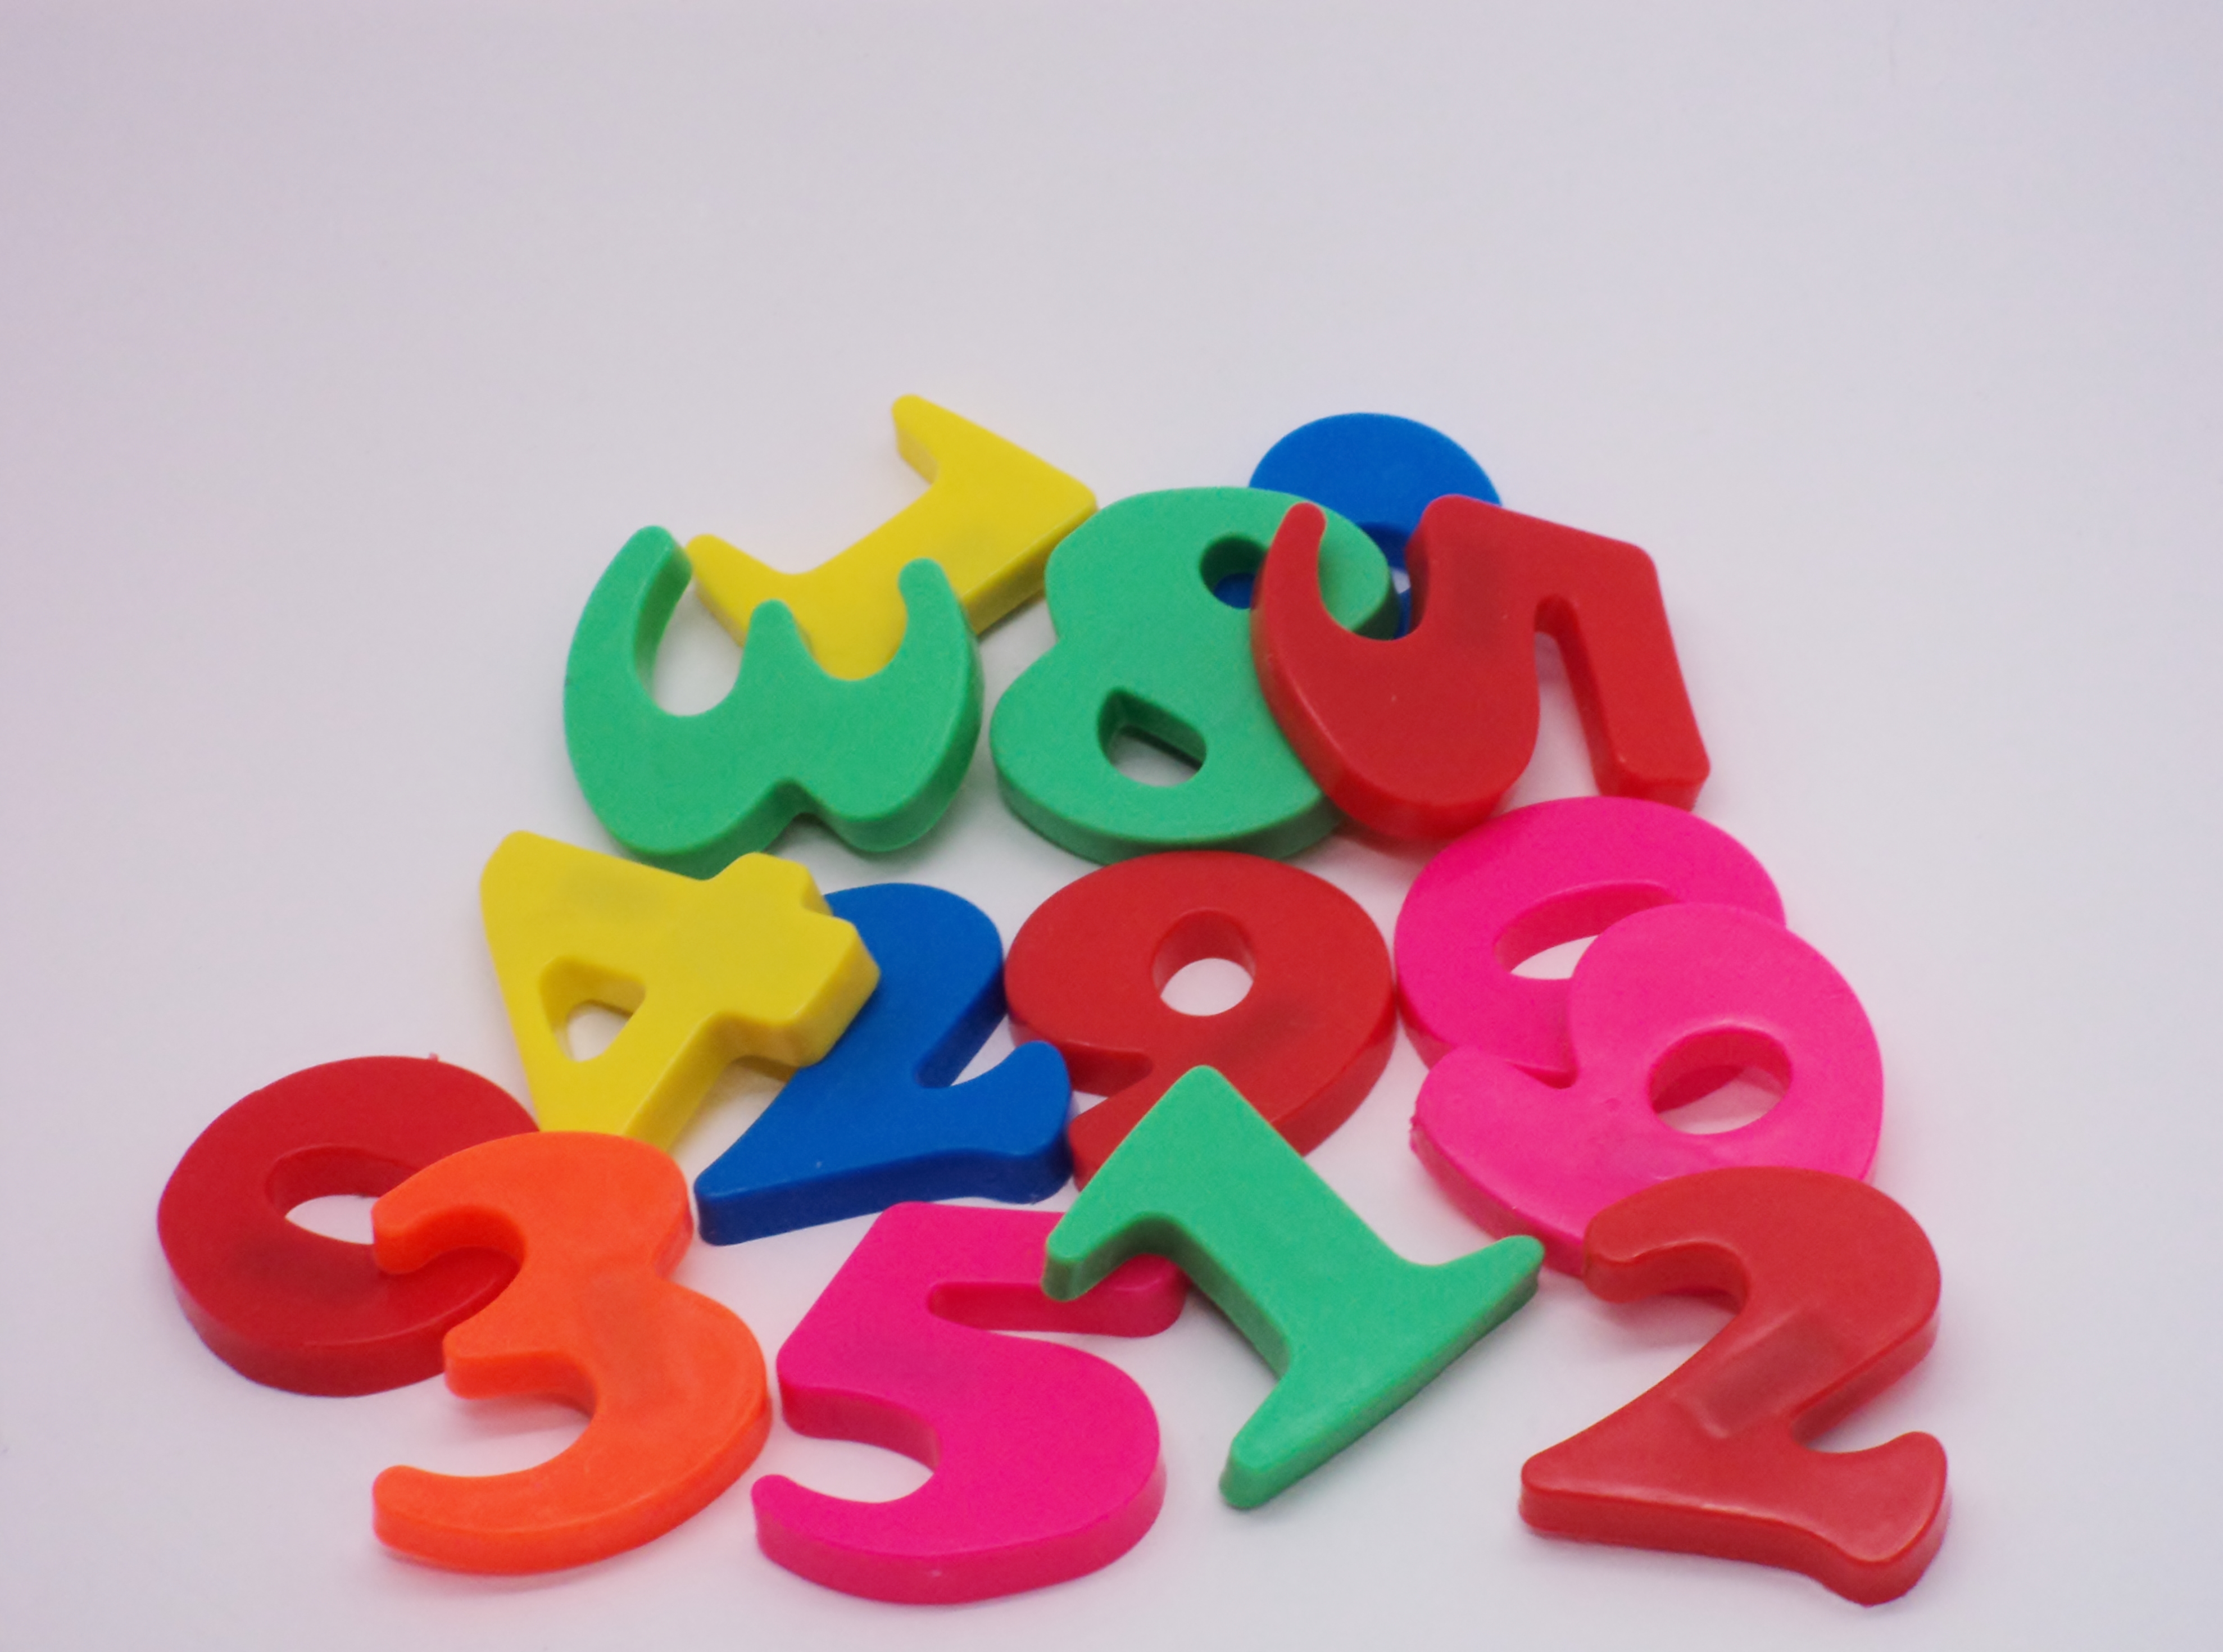 Scrambled Numbers, Count, Educational, Mixed, Numbers, HQ Photo